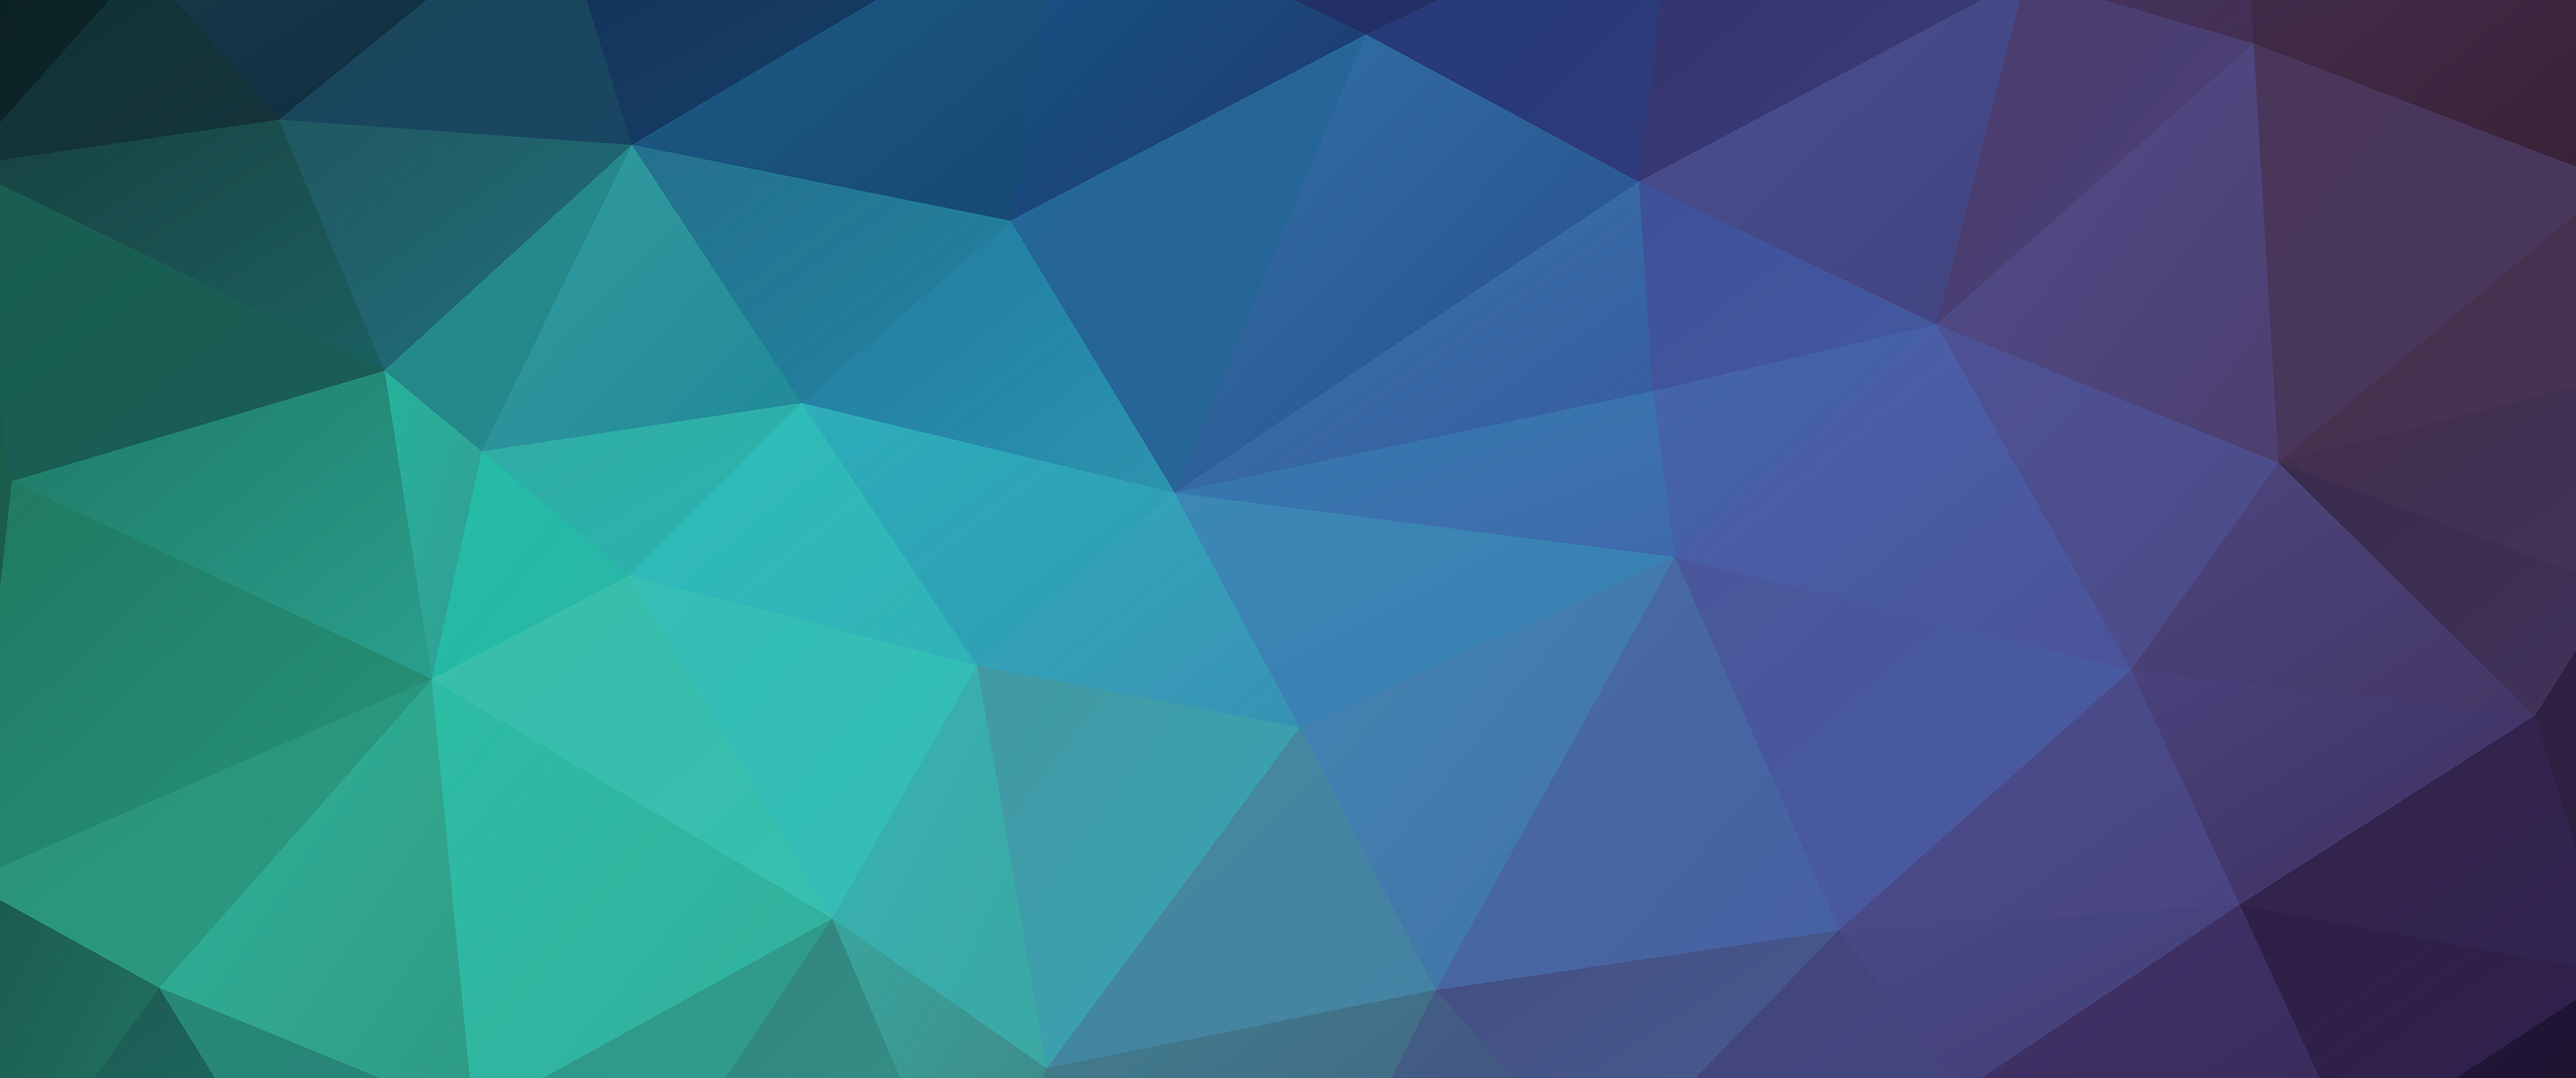 triangles, colorful, green colors, low poly original resolution. Digital wallpaper, Abstract, Wallpaper